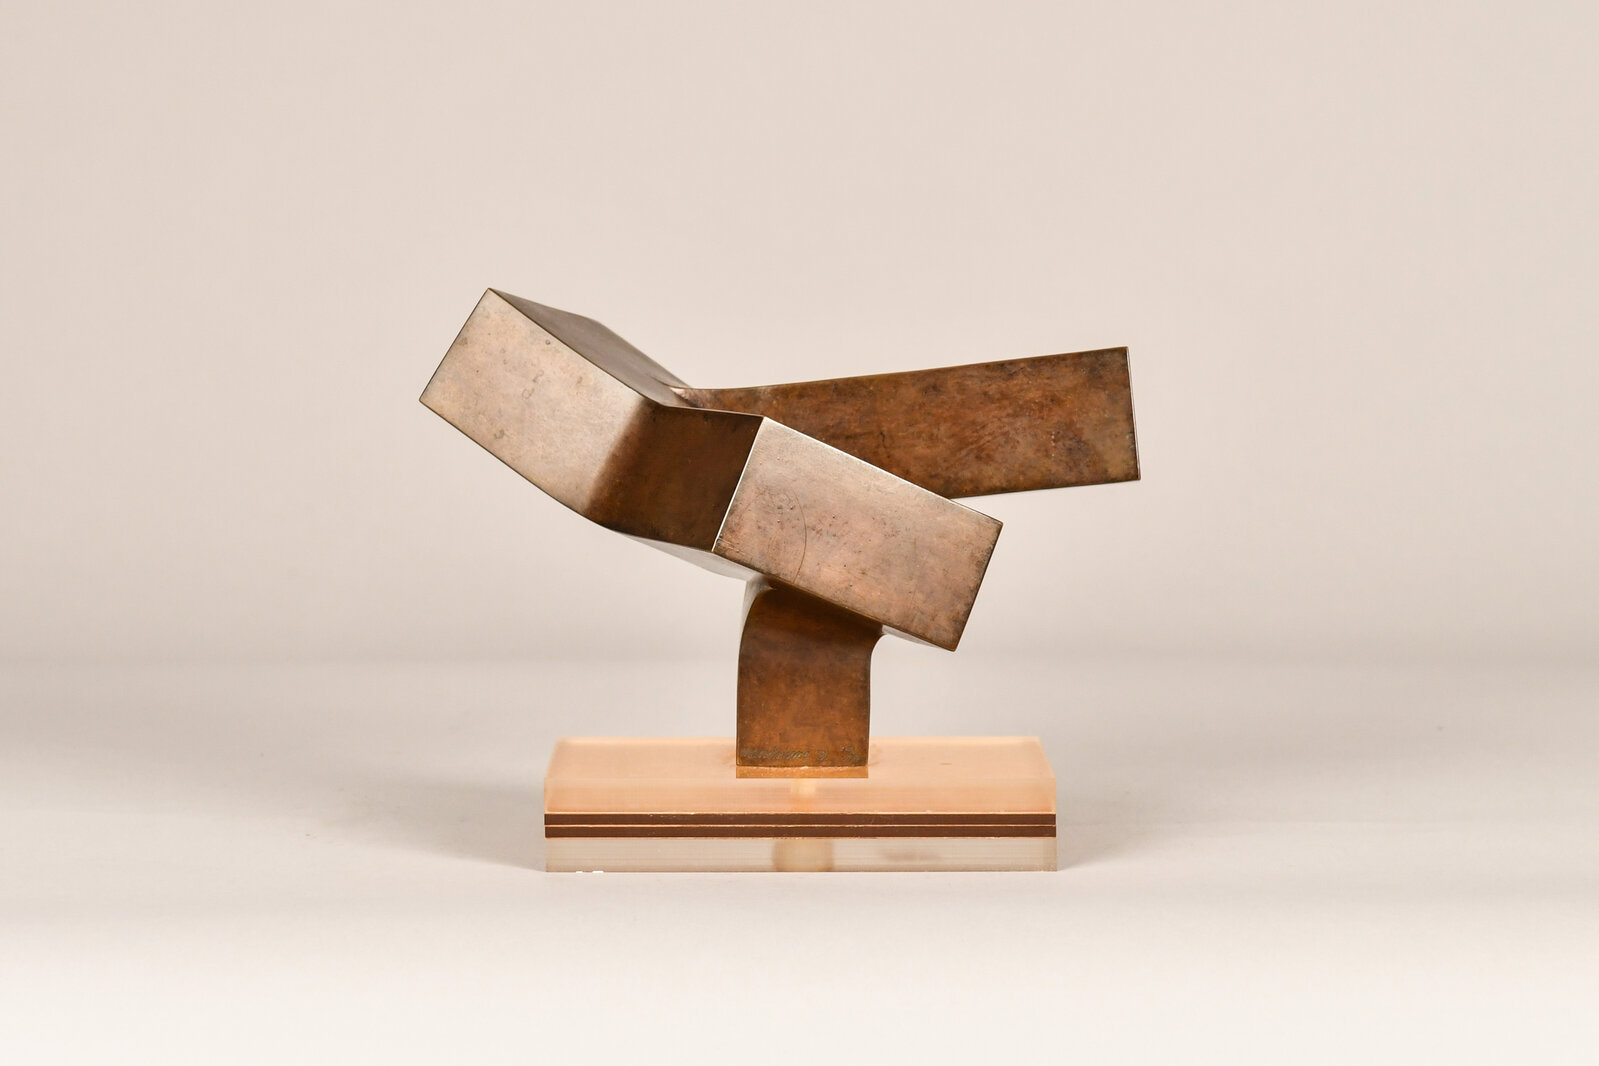 Clement Meadmore | Branching Out (1981) | Available for Sale | Artsy